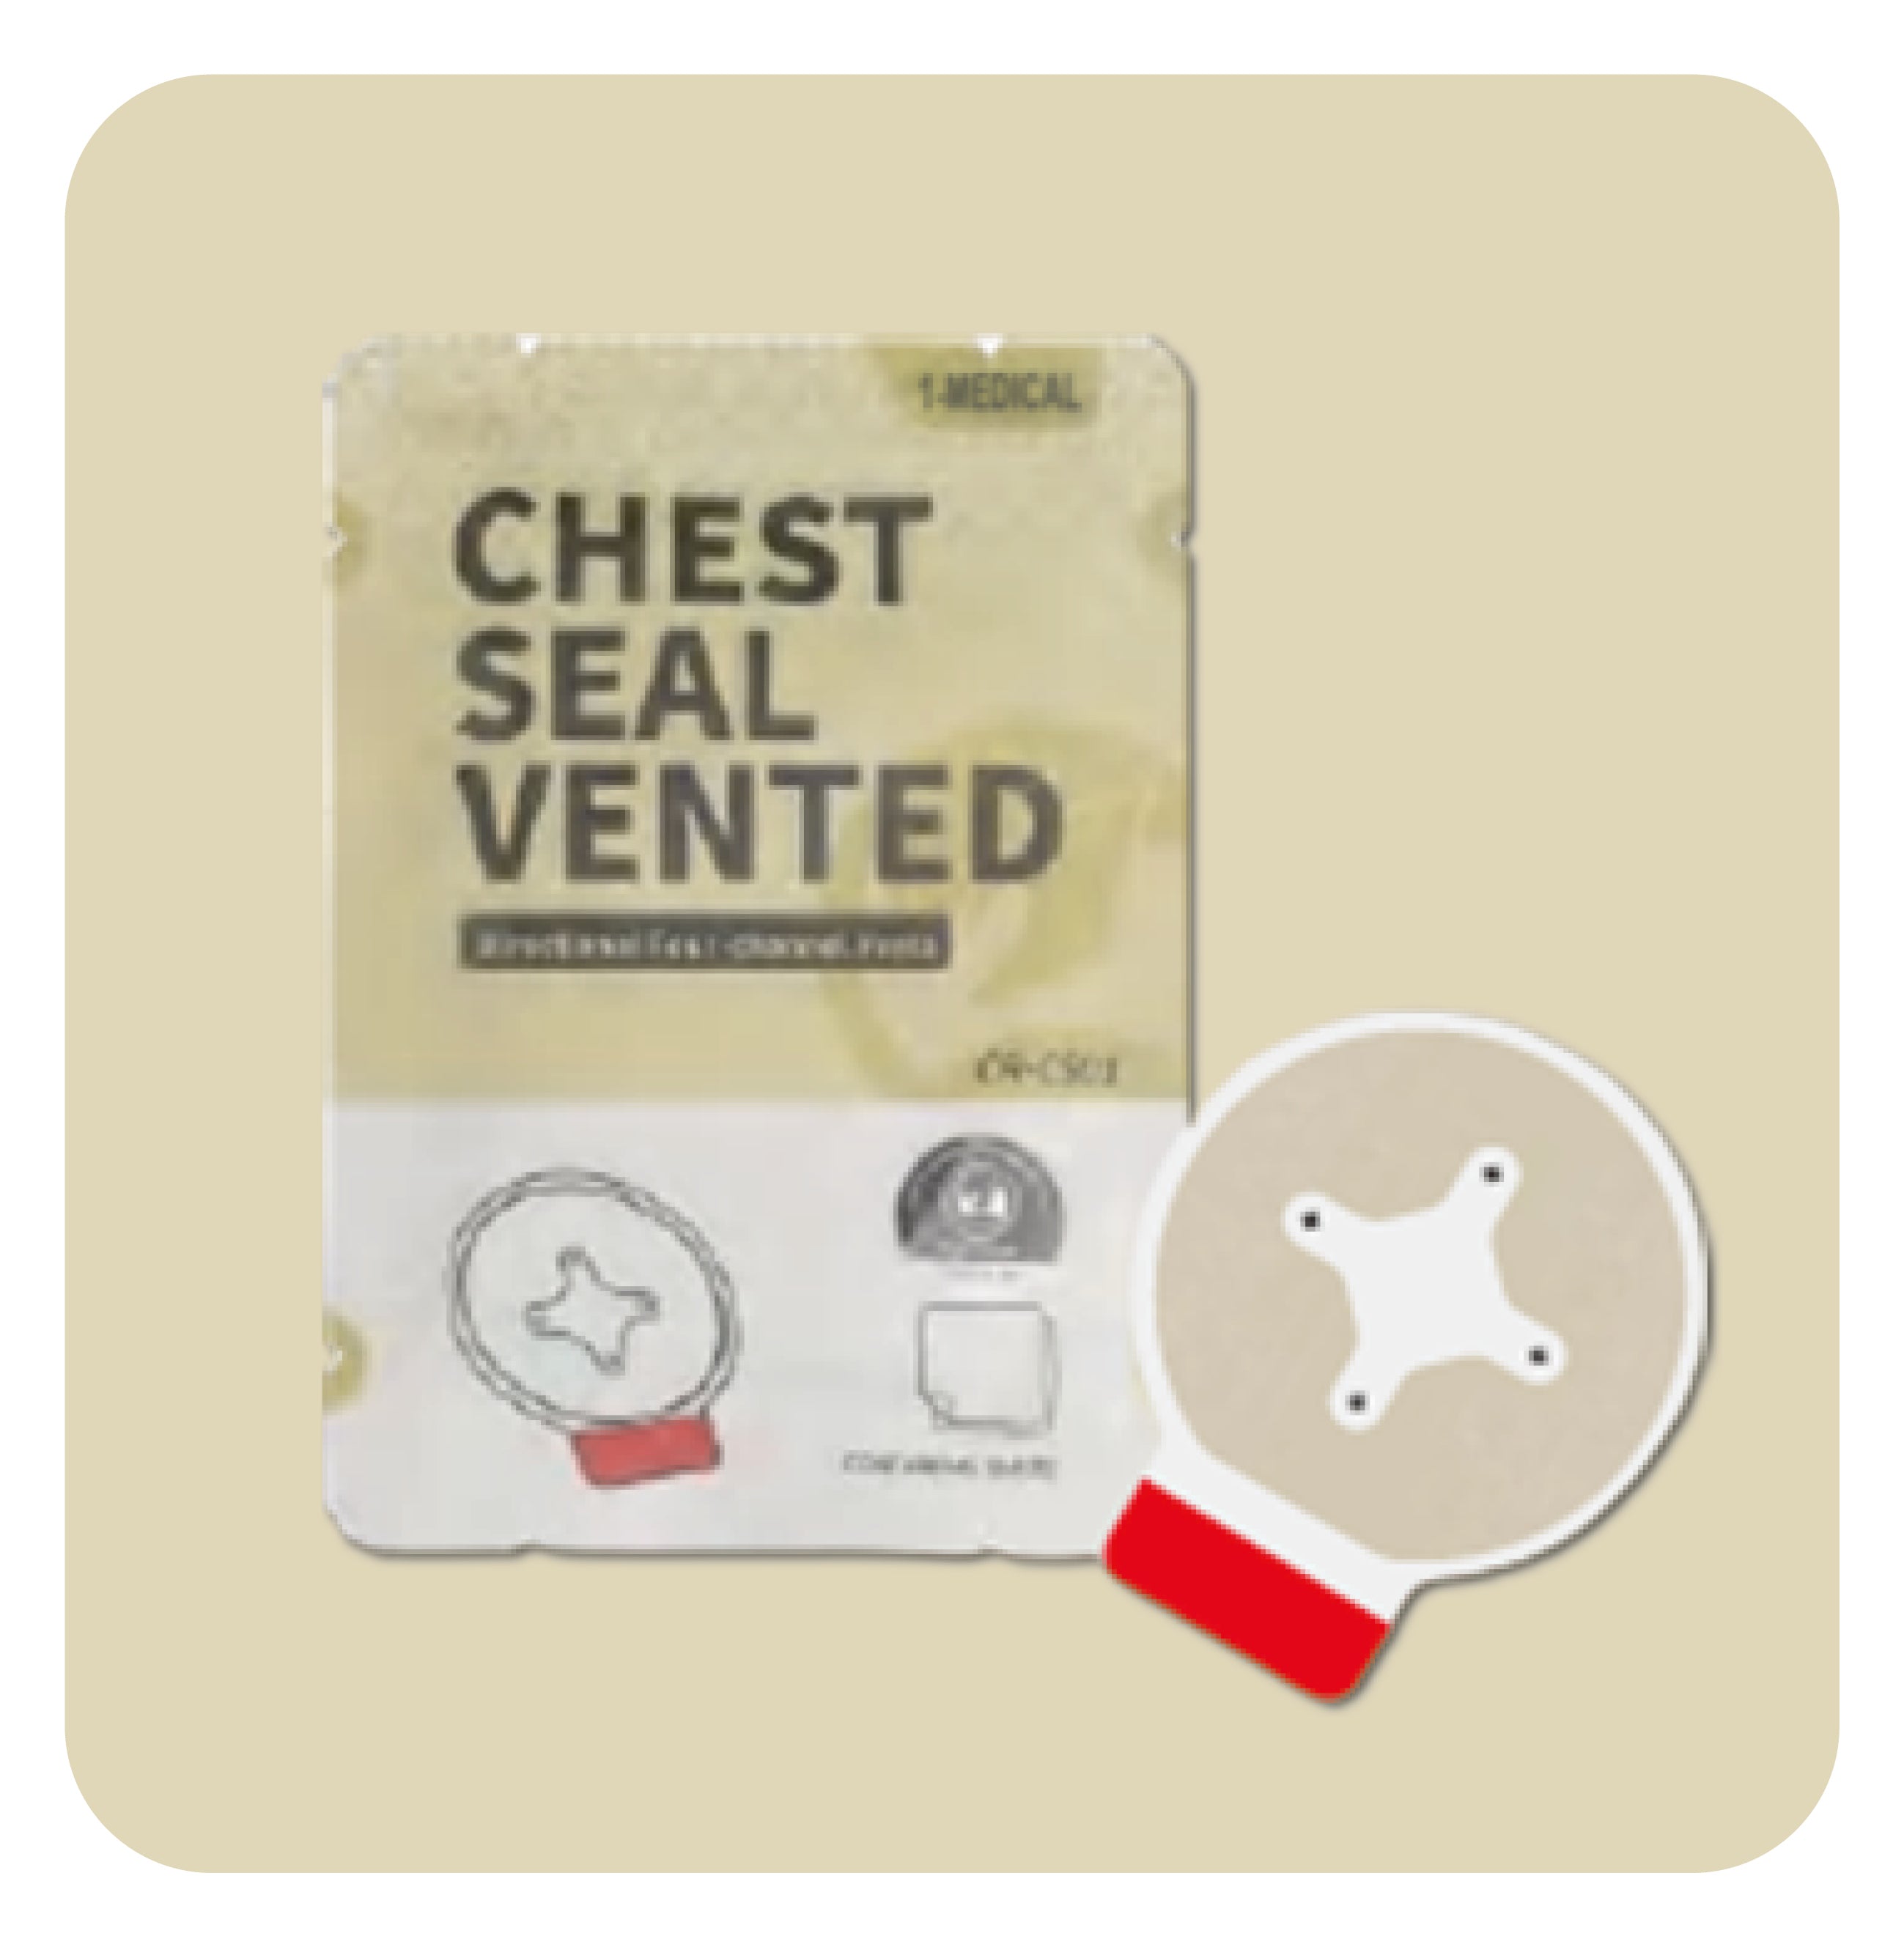 Chest Seal - Ventilated or Valveless